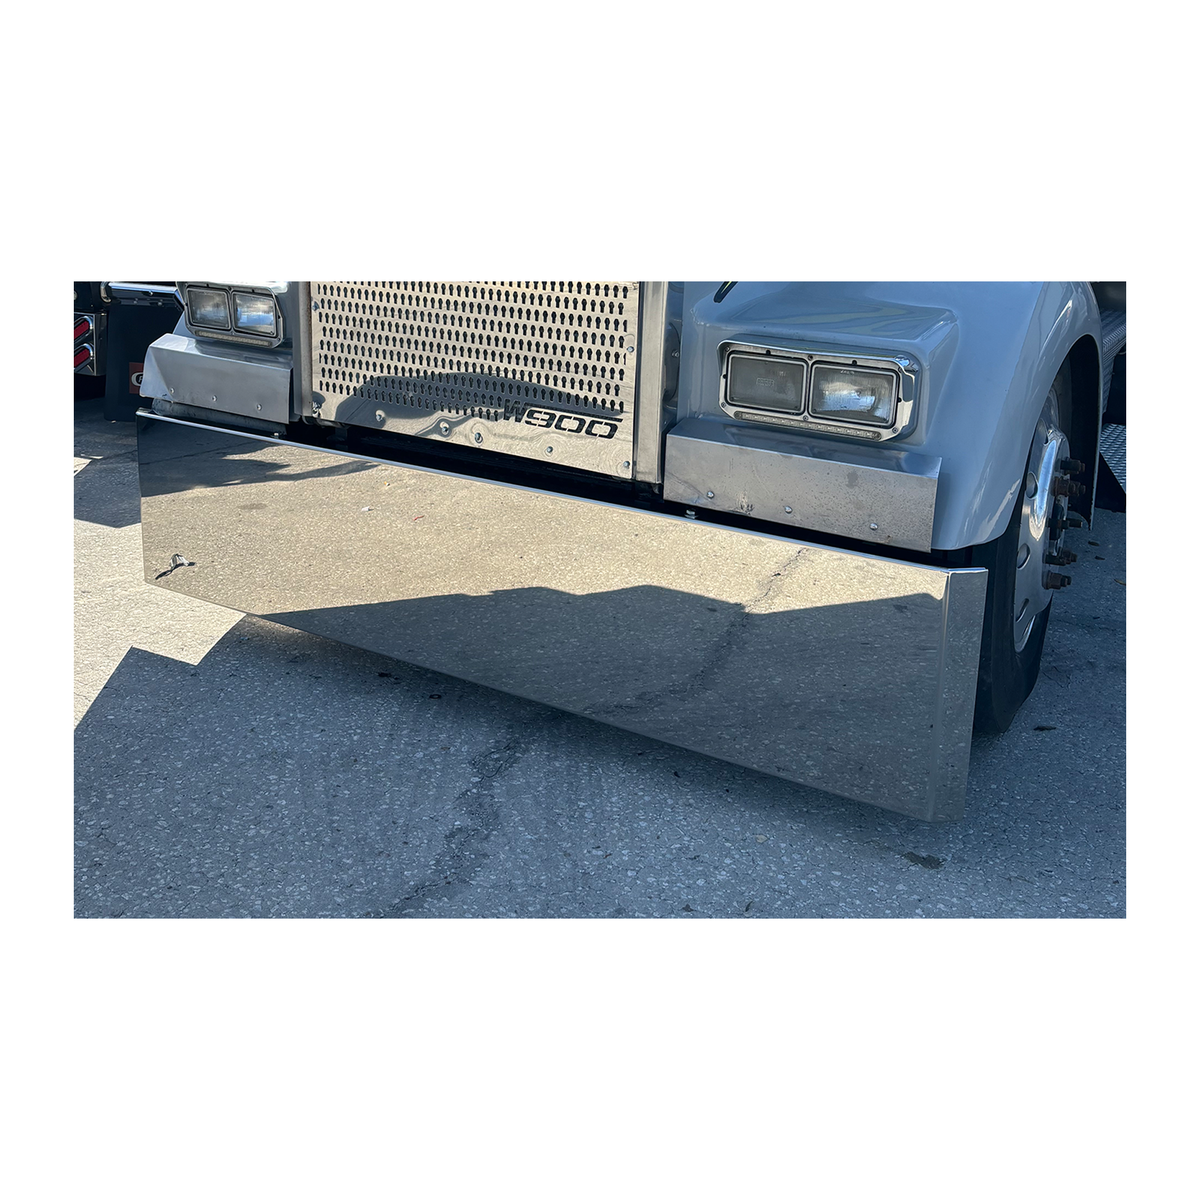 Kenworth W900 Steynless Steel Mitered End Bumper, Blind Mount & Mounting Plates For Kenworth By Floridas Finest Customs Works, Mirror Finish Made In USA